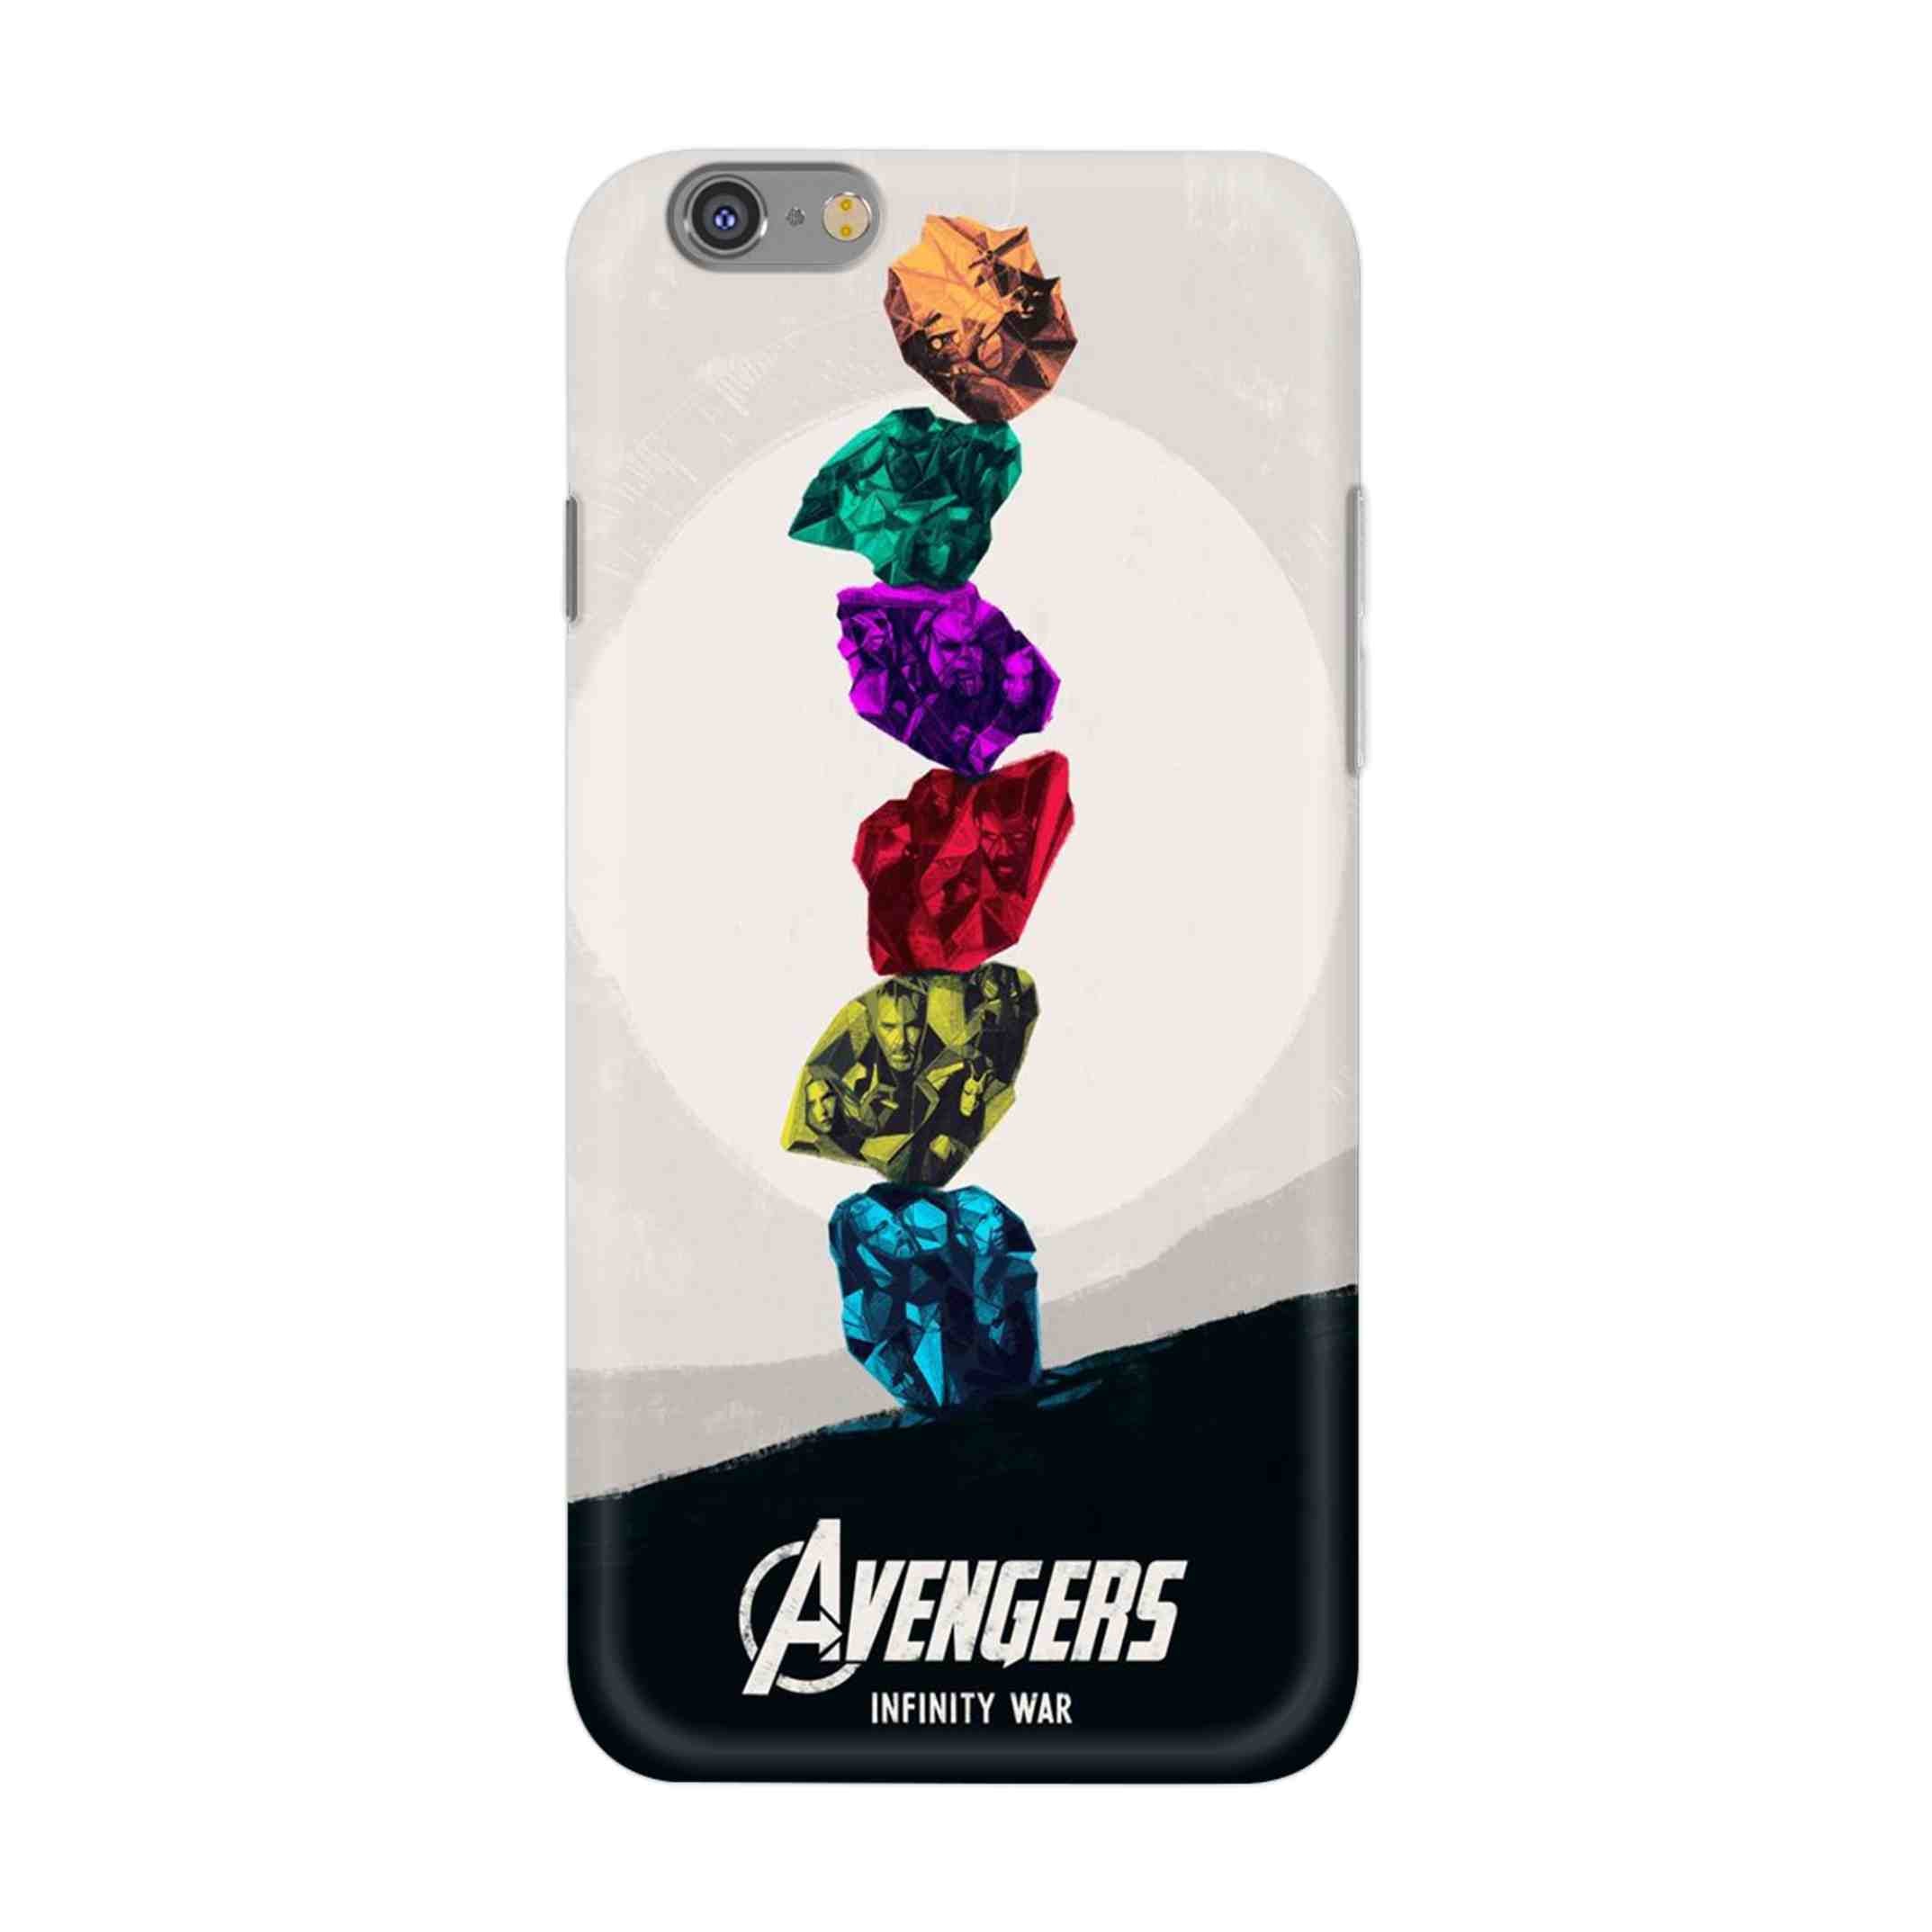 Buy Avengers Stone Hard Back Mobile Phone Case/Cover For iPhone 6 / 6s Online